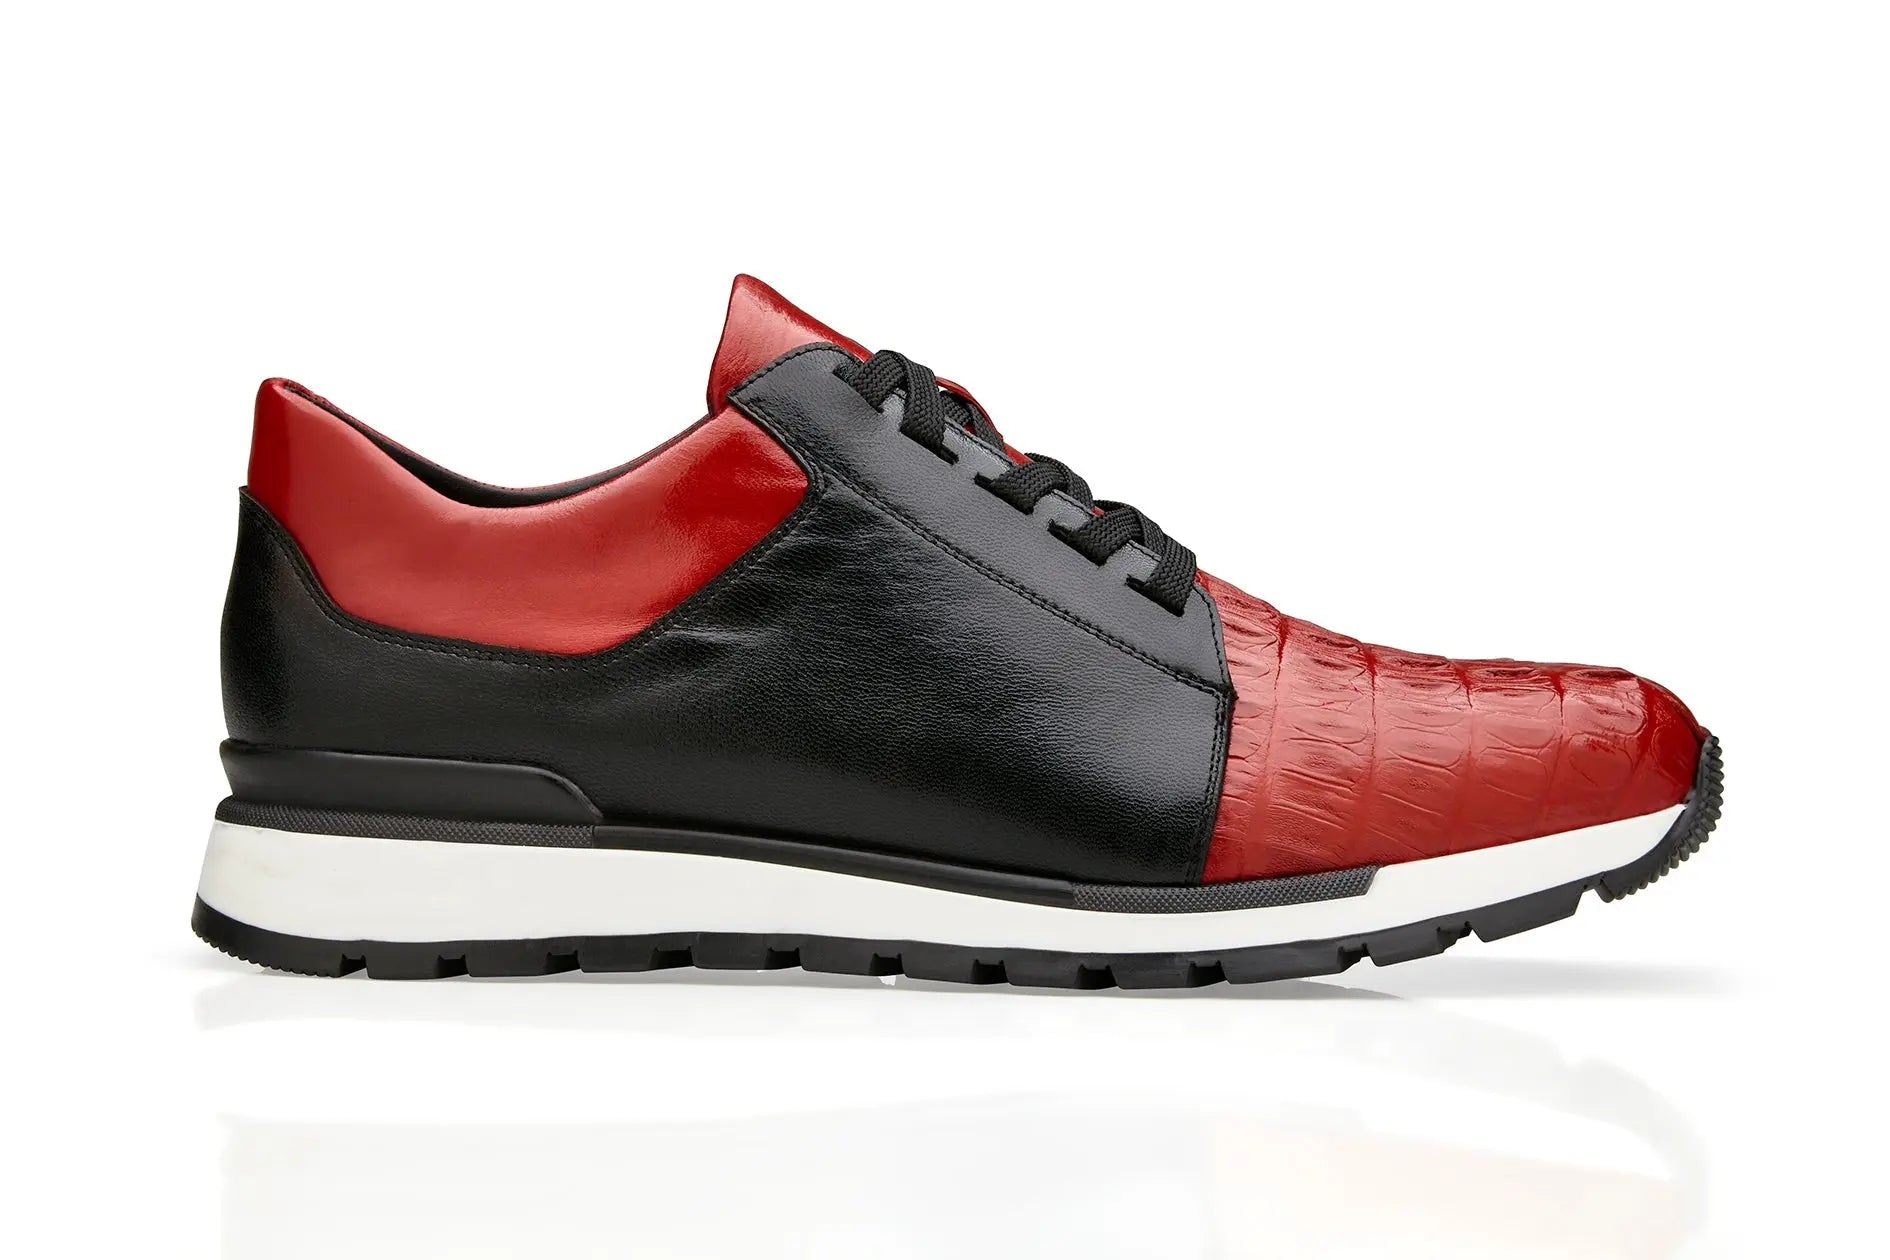 Belvedere Titan in Red and Black Caiman Crocodile Sneakers